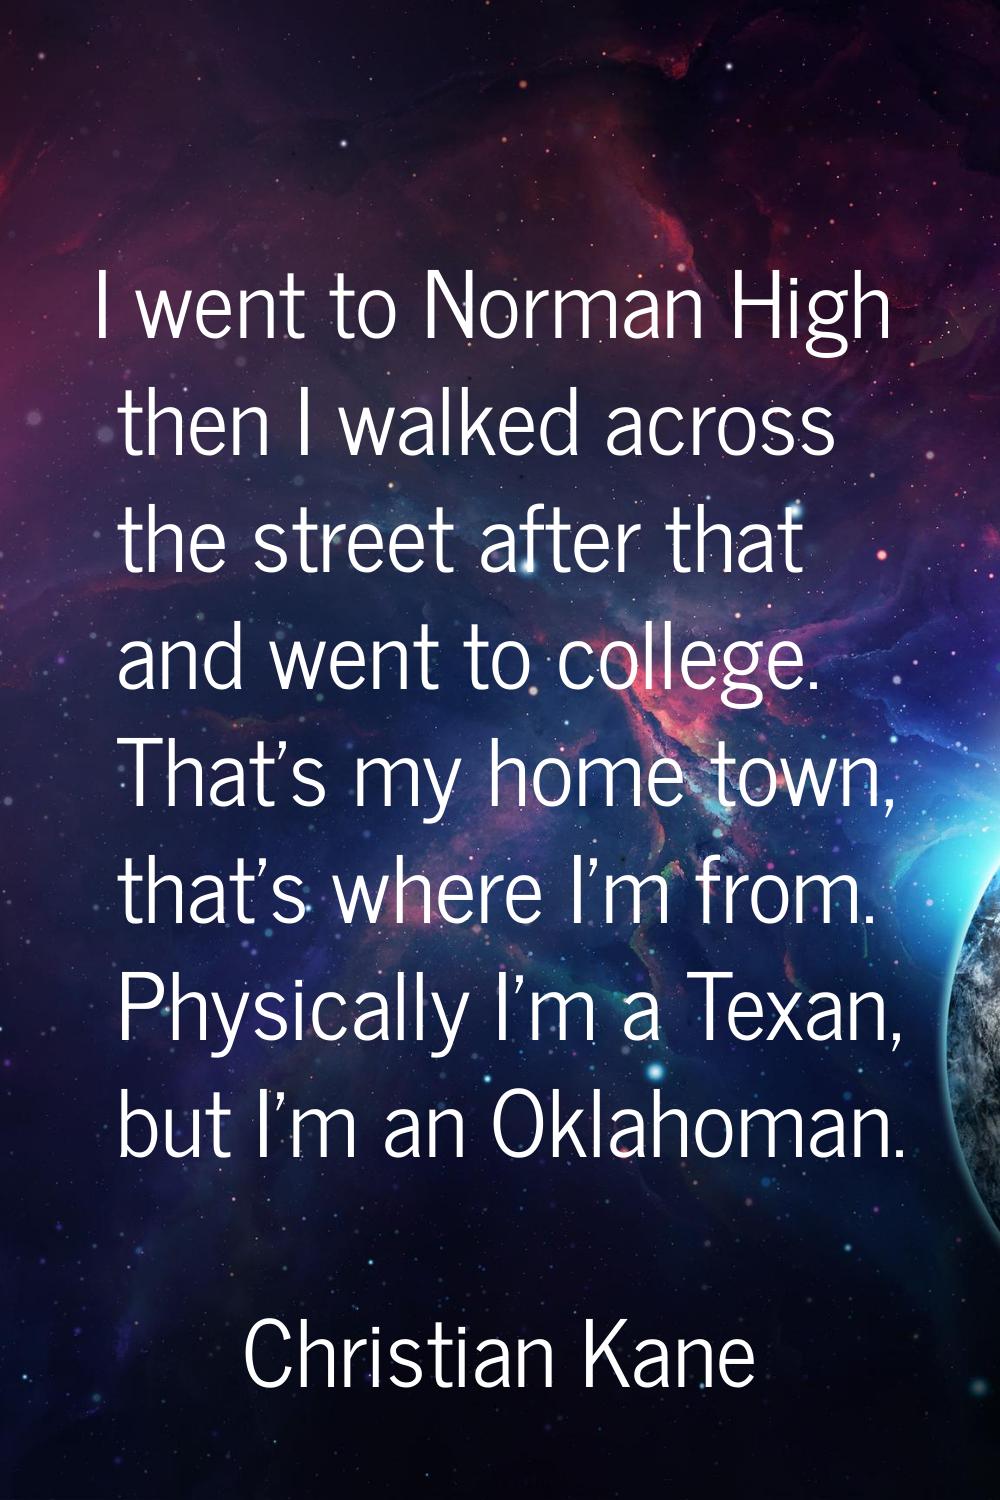 I went to Norman High then I walked across the street after that and went to college. That's my hom